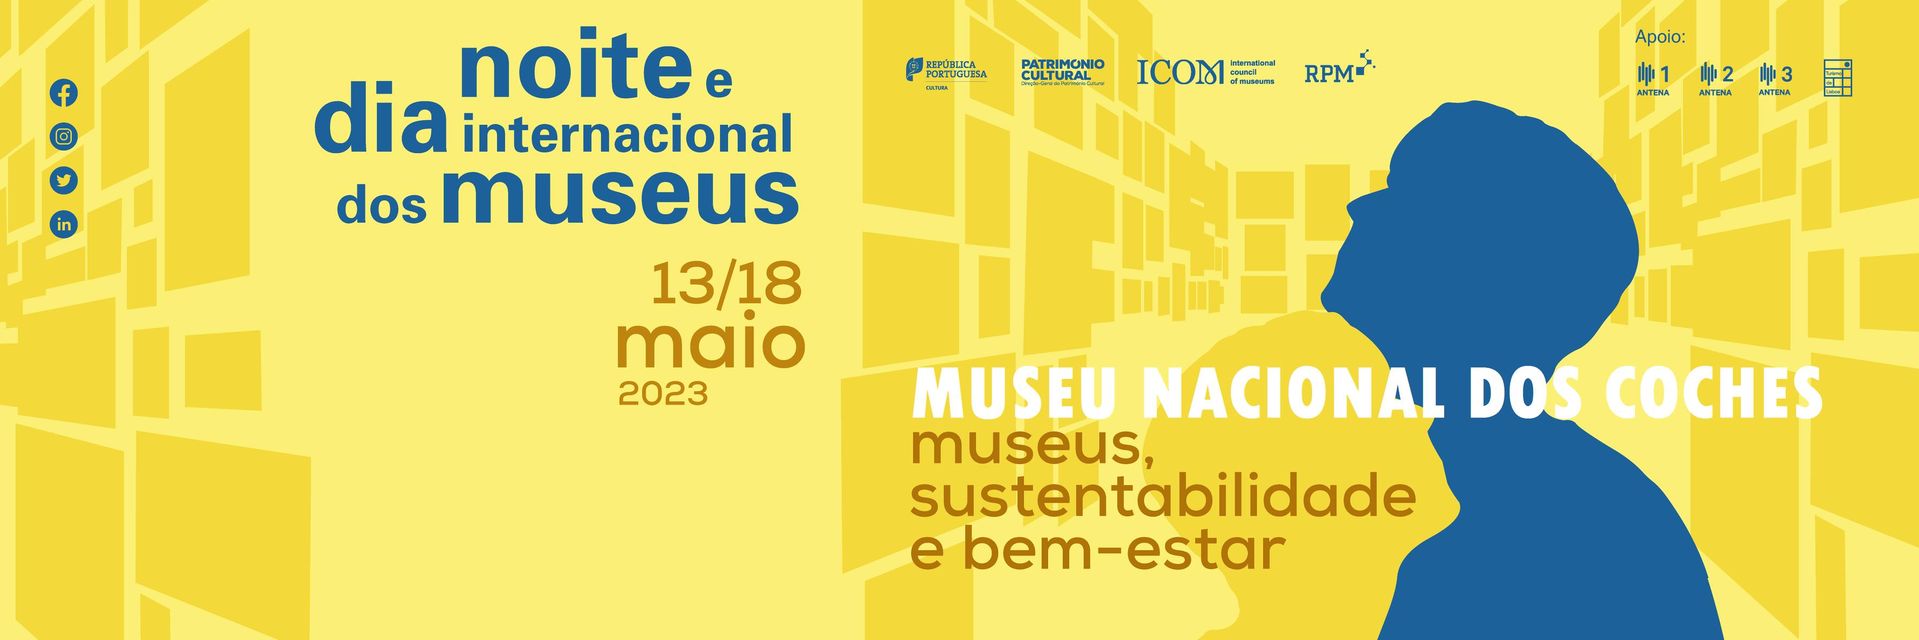 NOITE DOS MUSEUS - M.N.COCHES